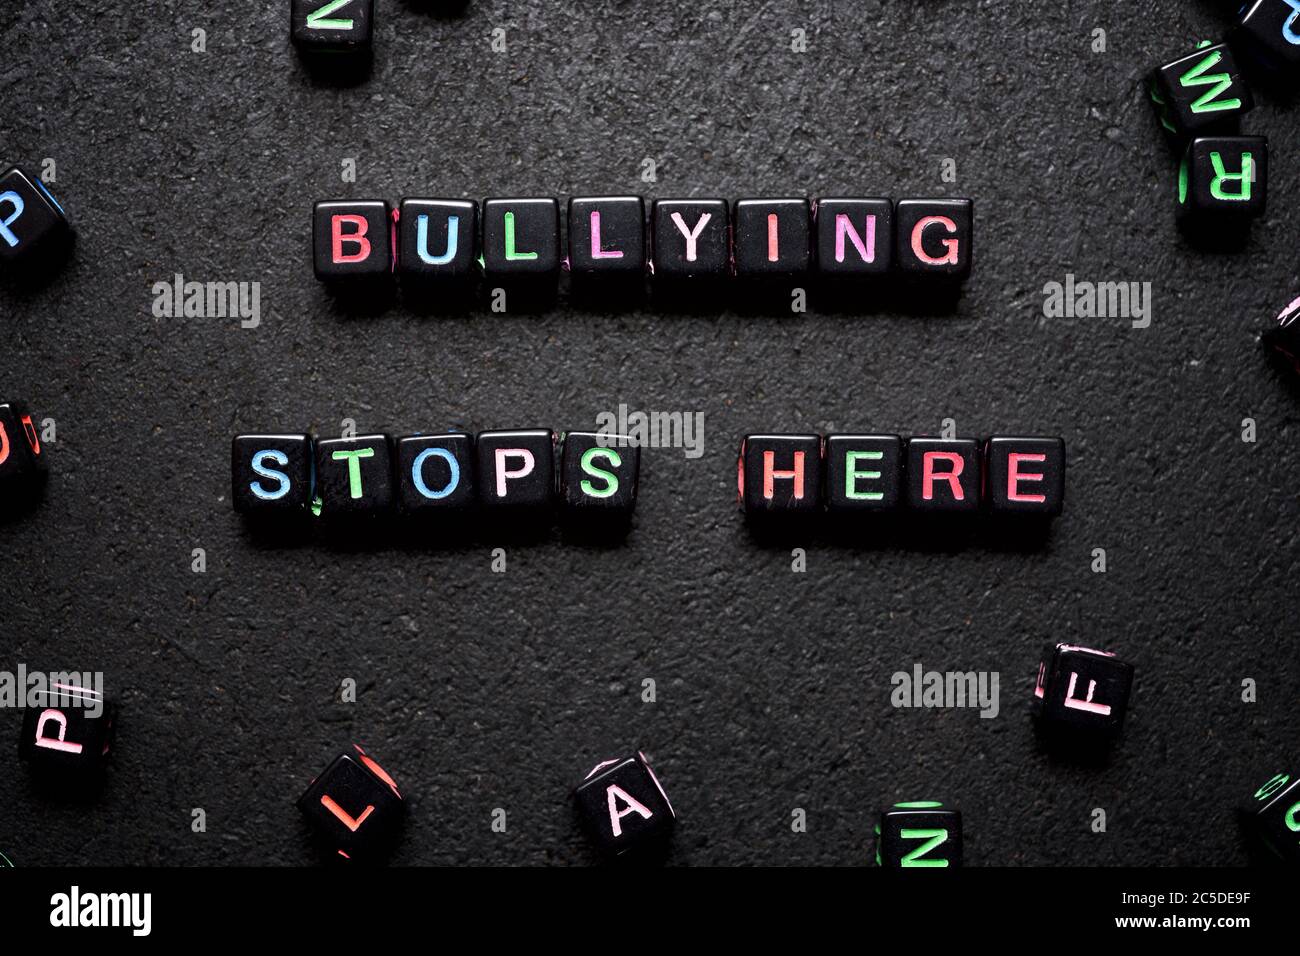 Bullying stop here sentence on a black table. Stock Photo